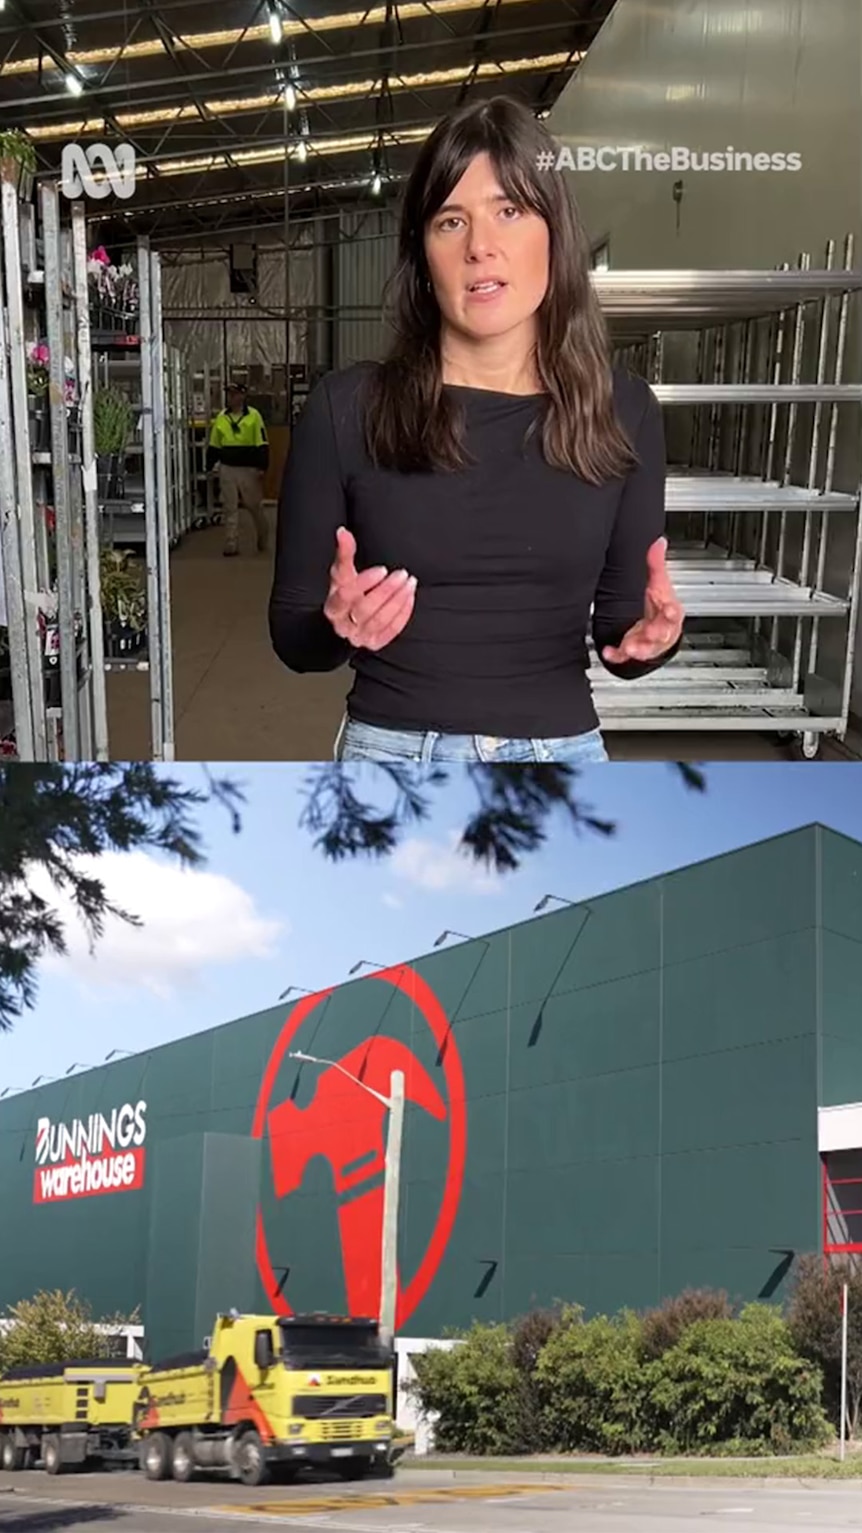 Photo composite shows a young woman and an exterior shot of a building with "Bunnings" written on its side.